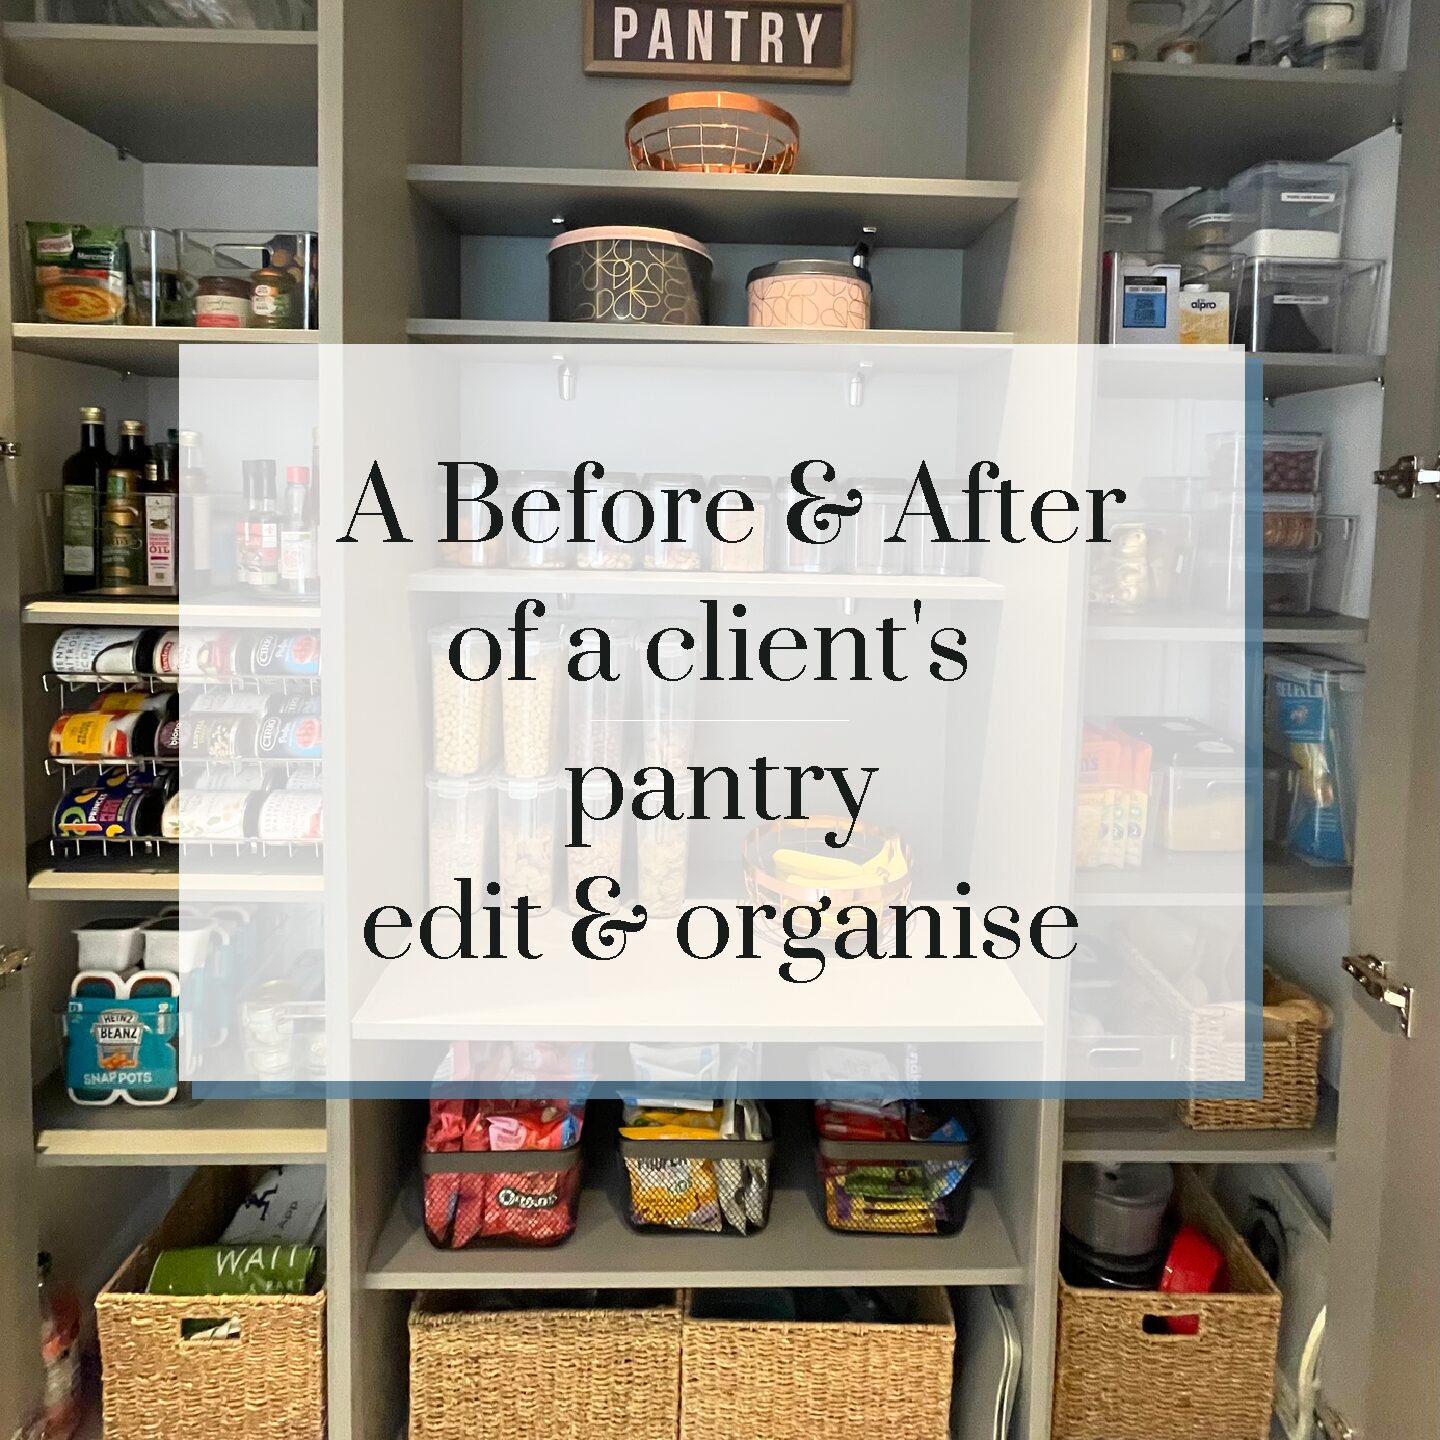 A Before & After of my client’s pantry edit & organise